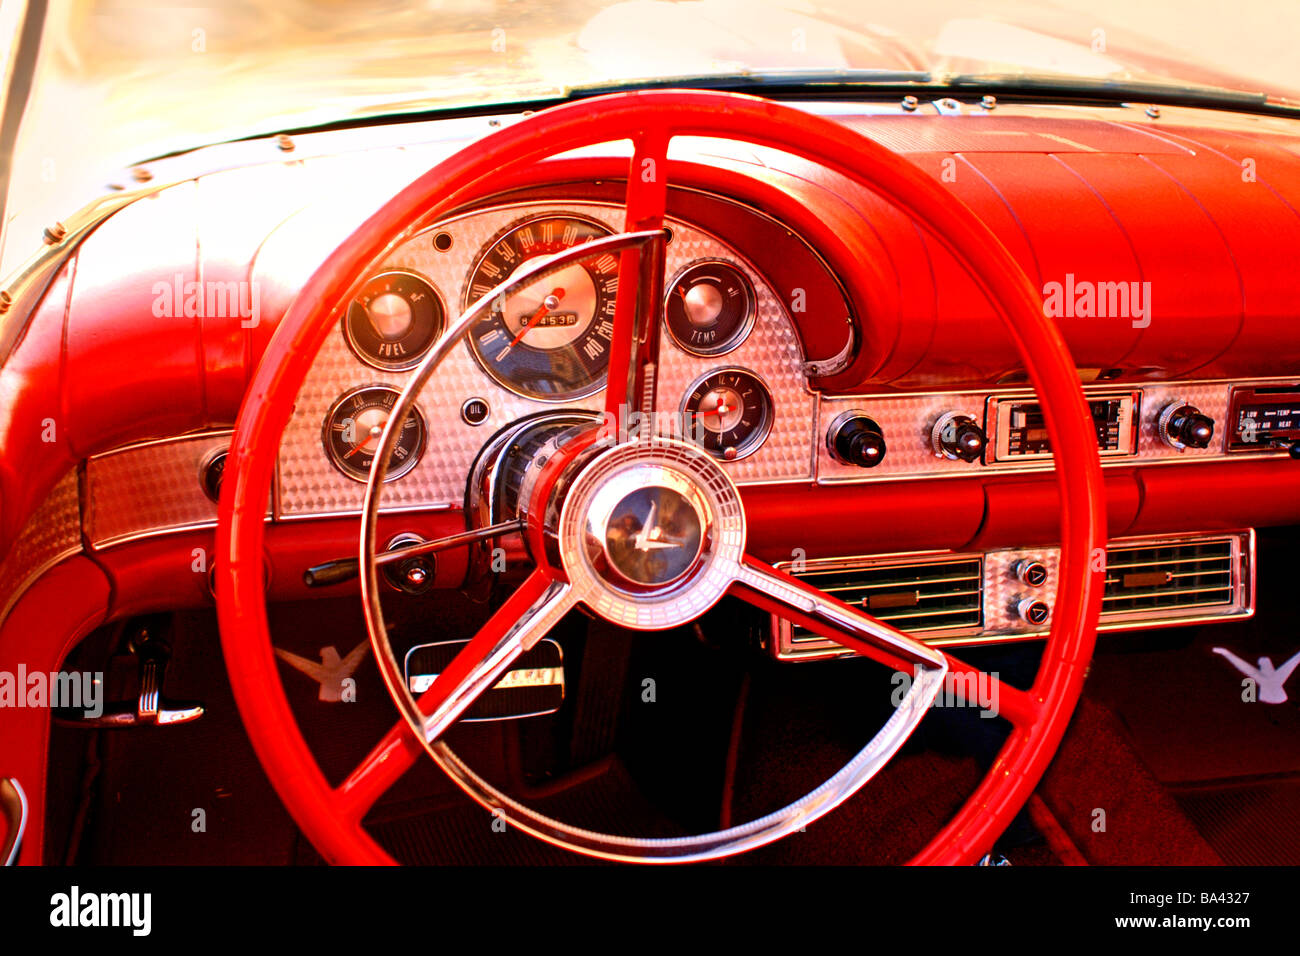 Interior shot of Gleaming red1957 Ford thunderbird convertible, parked on the street in the lakewood area of Dallas. Stock Photo